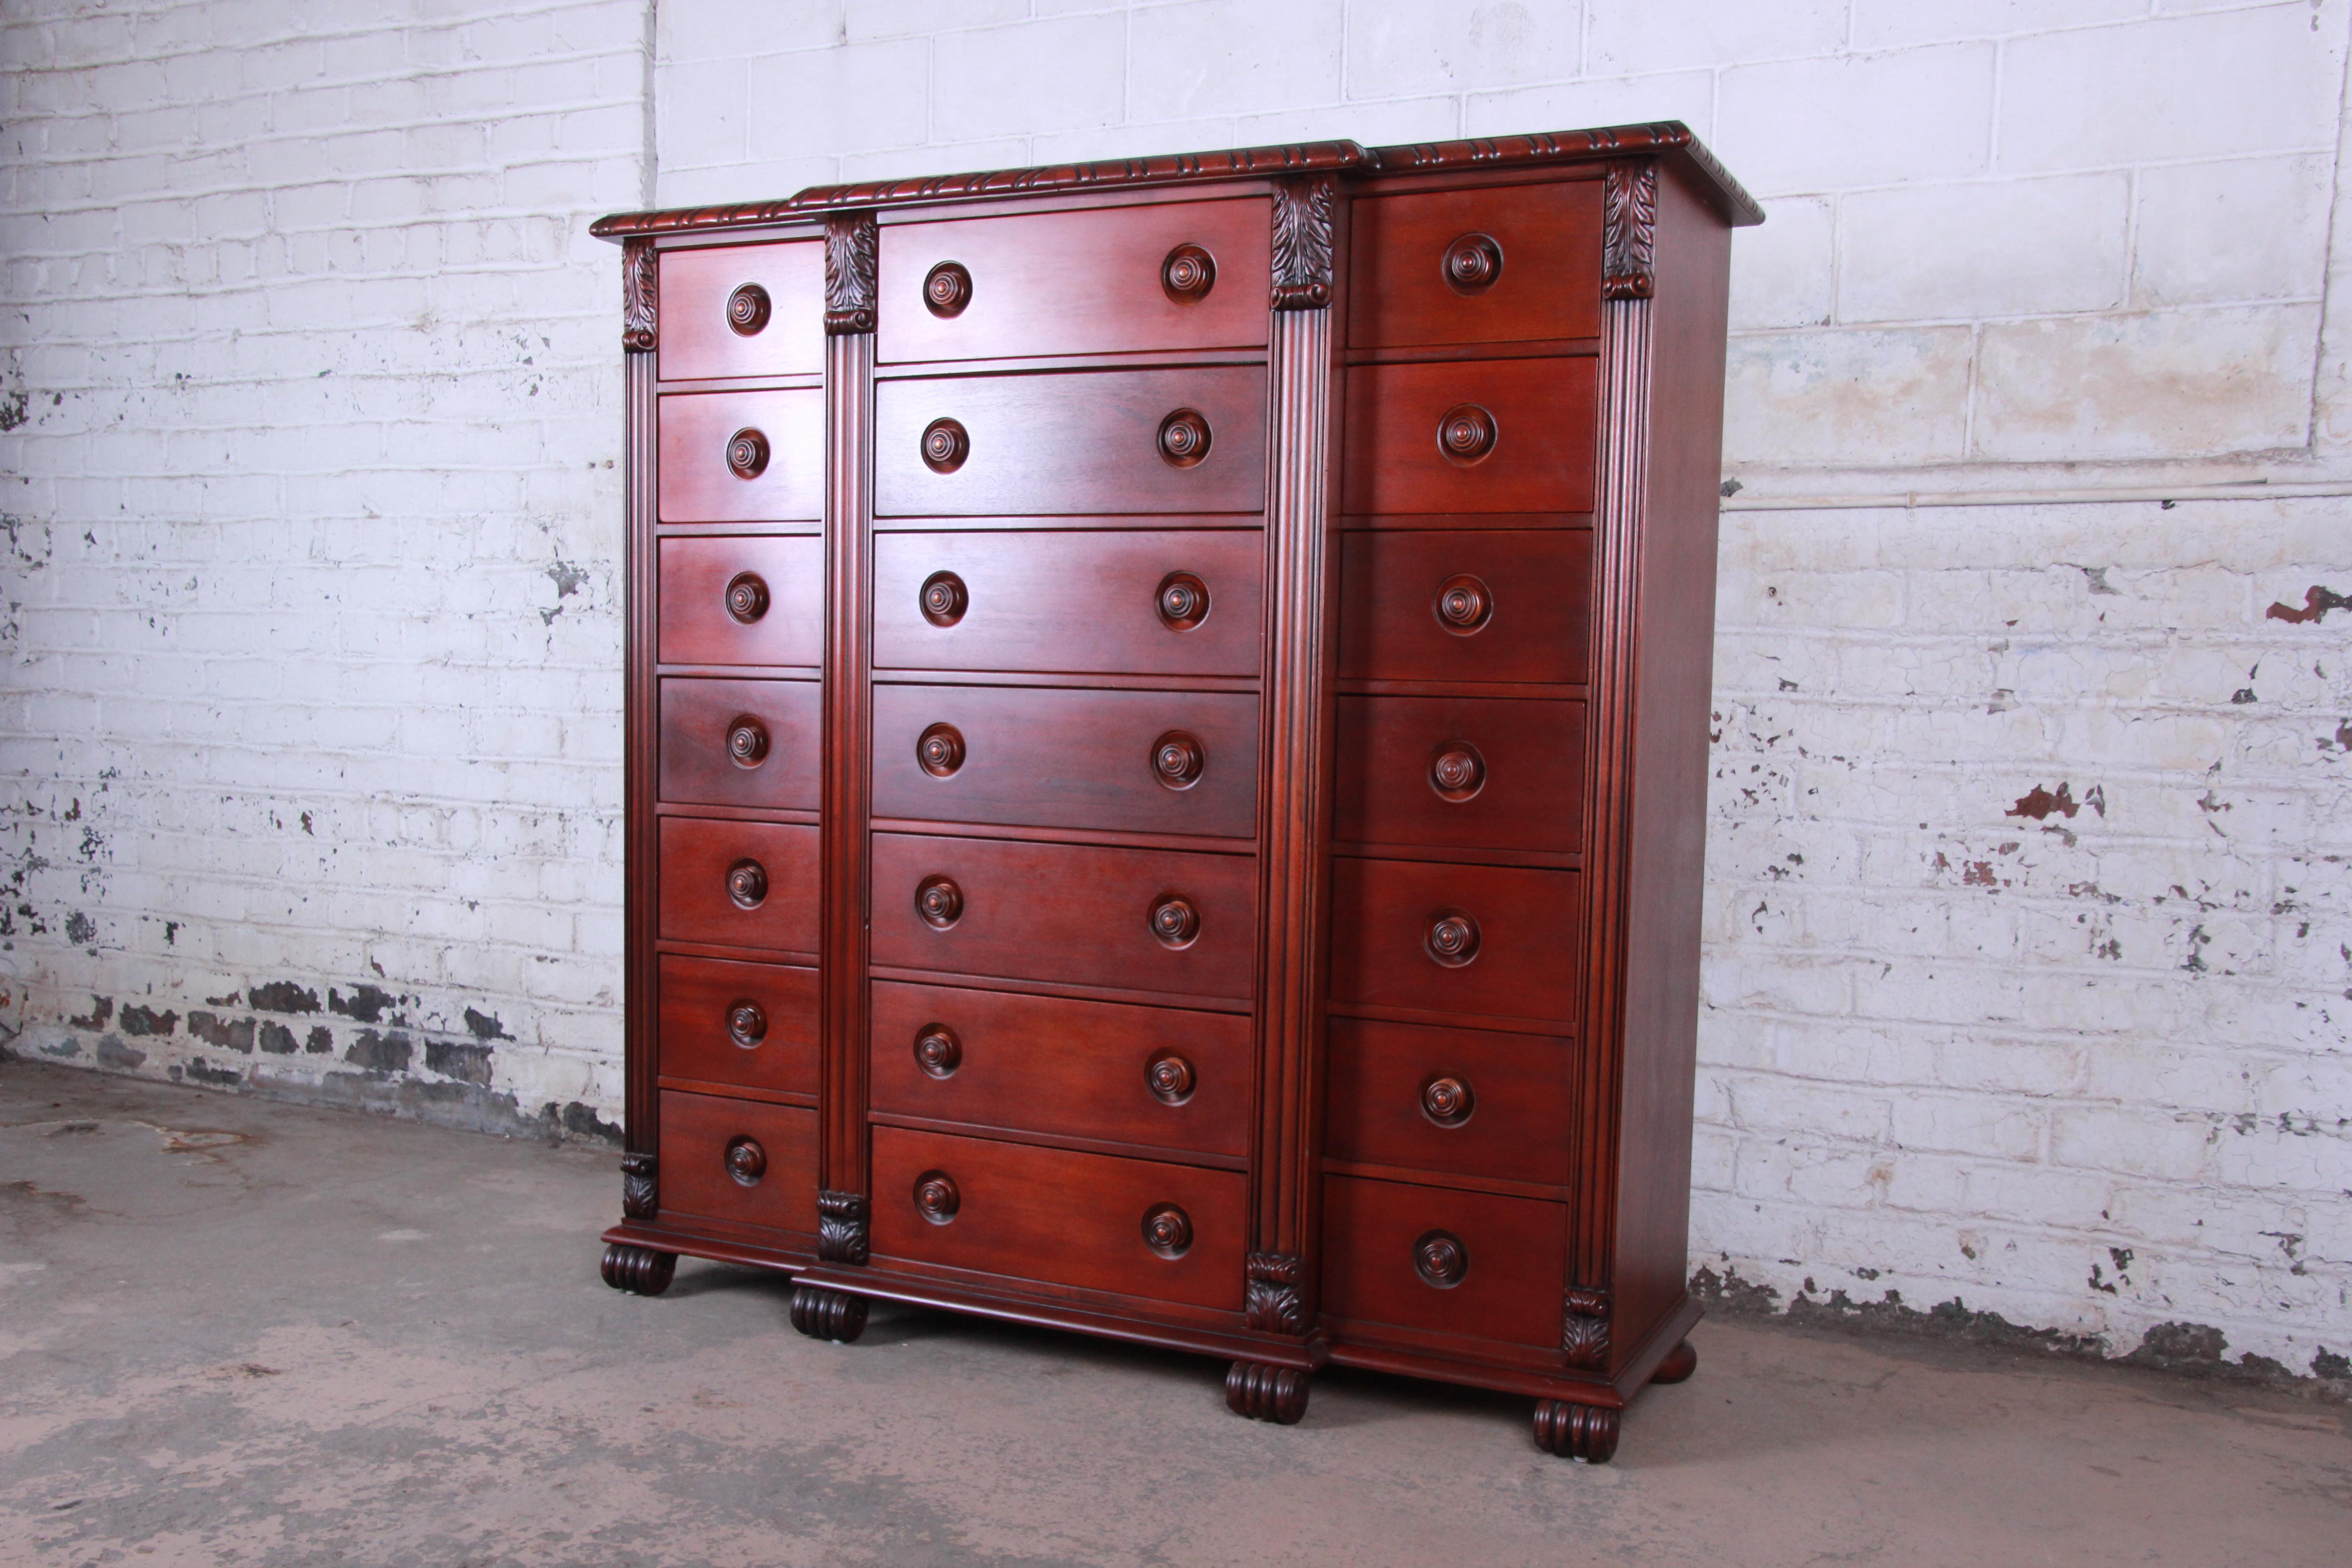 An exceptional 21-drawer neoclassical mahogany tall chest of drawers by Ralph Lauren. The dresser features stunning mahogany wood grain and beautiful carved wood details, with column style trim that frames all drawers with leaf accents to the top